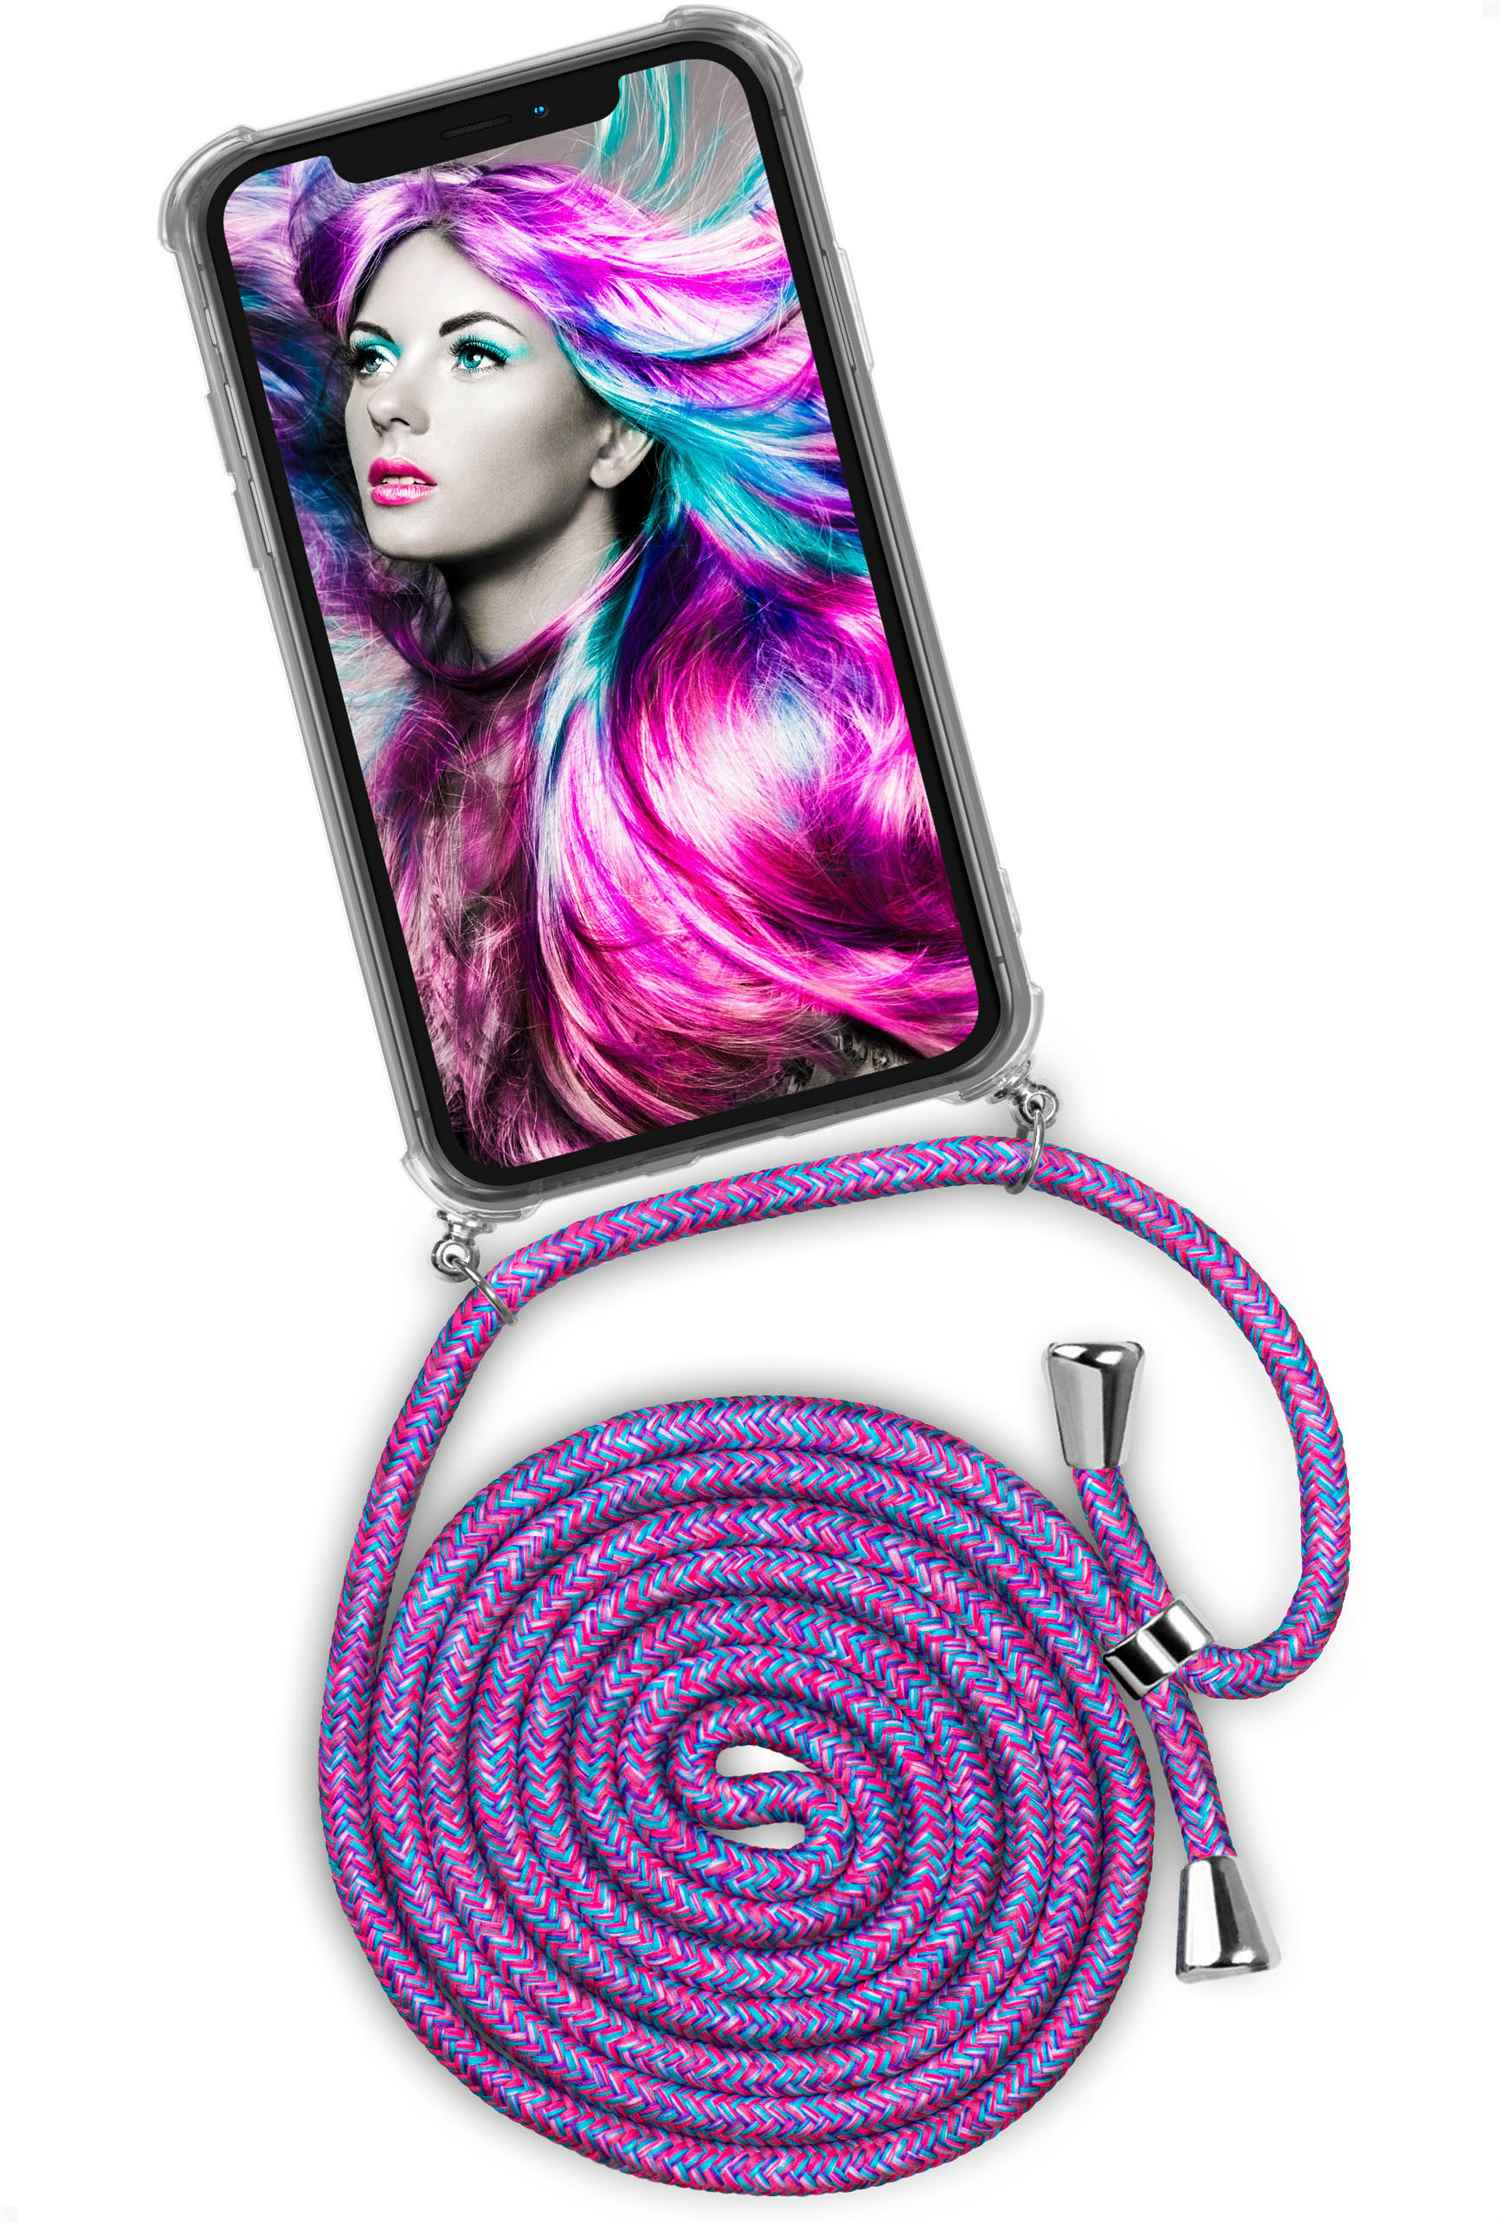 Crazy (Silber) Twist 12 Max, Backcover, Pro Unicorn ONEFLOW Apple, iPhone Case,